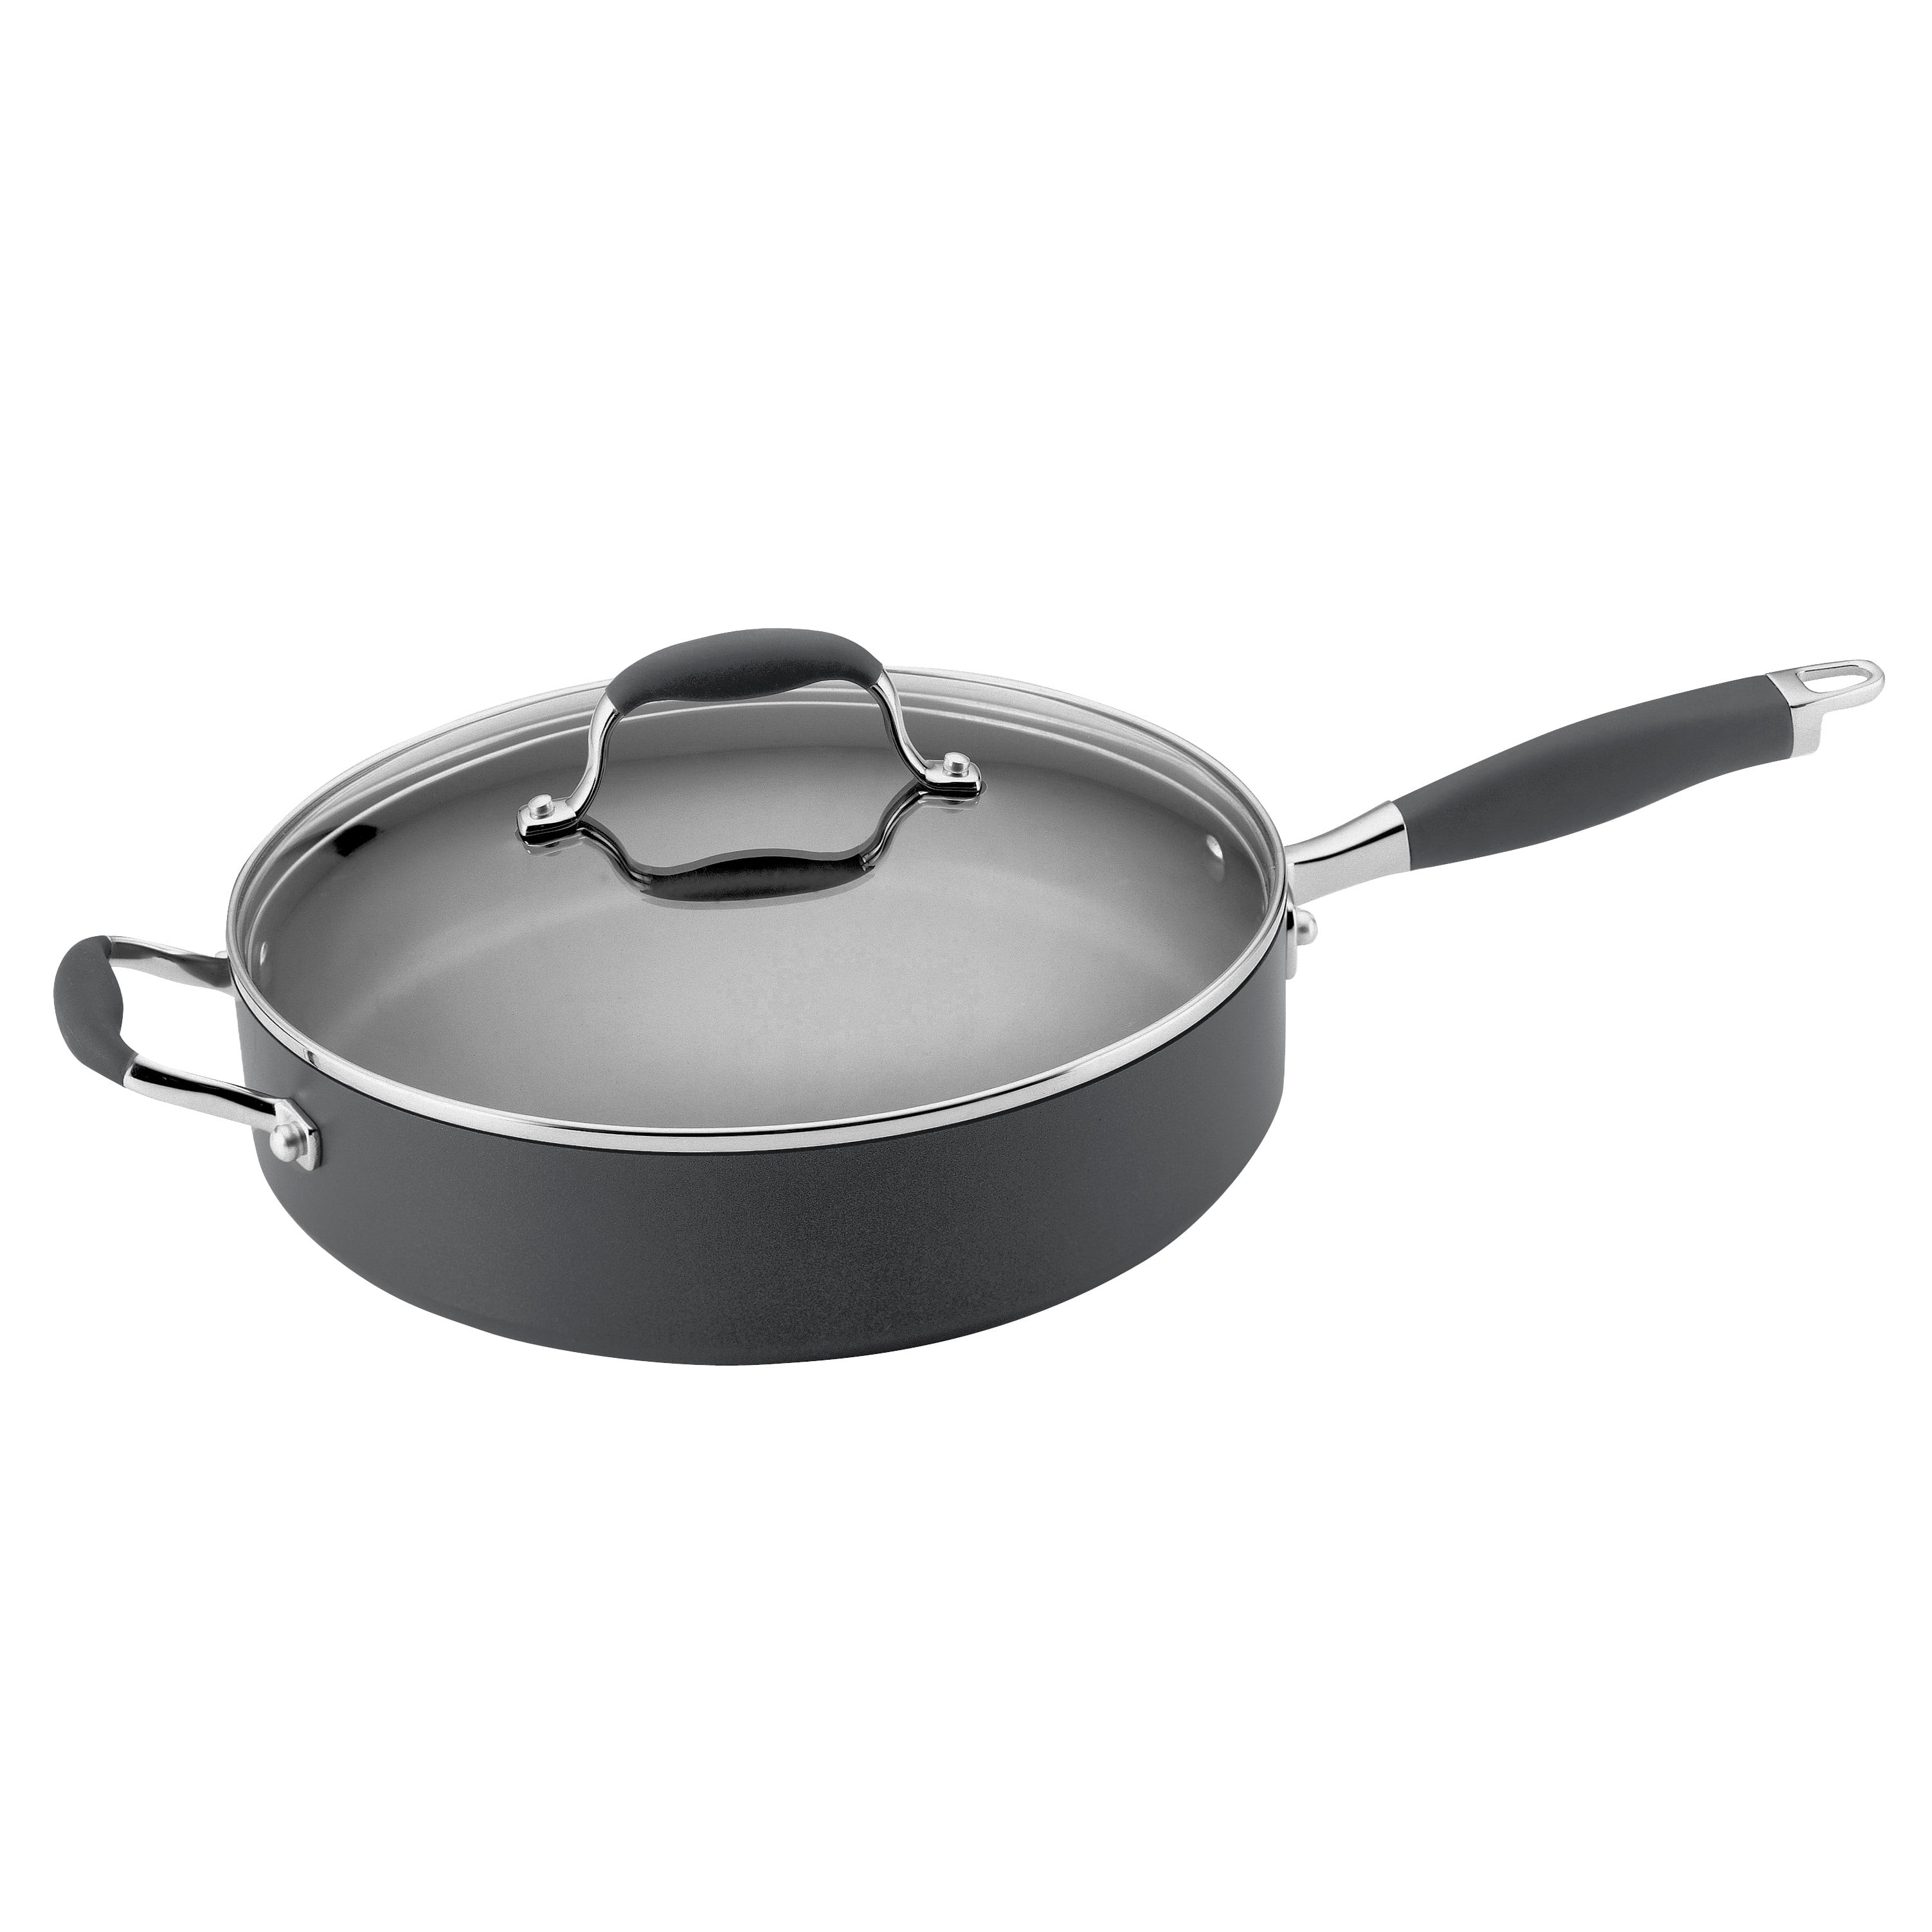 Saflon Titanium Nonstick Saute Pan with Tempered Lid Available in 4 and 5-Quart 